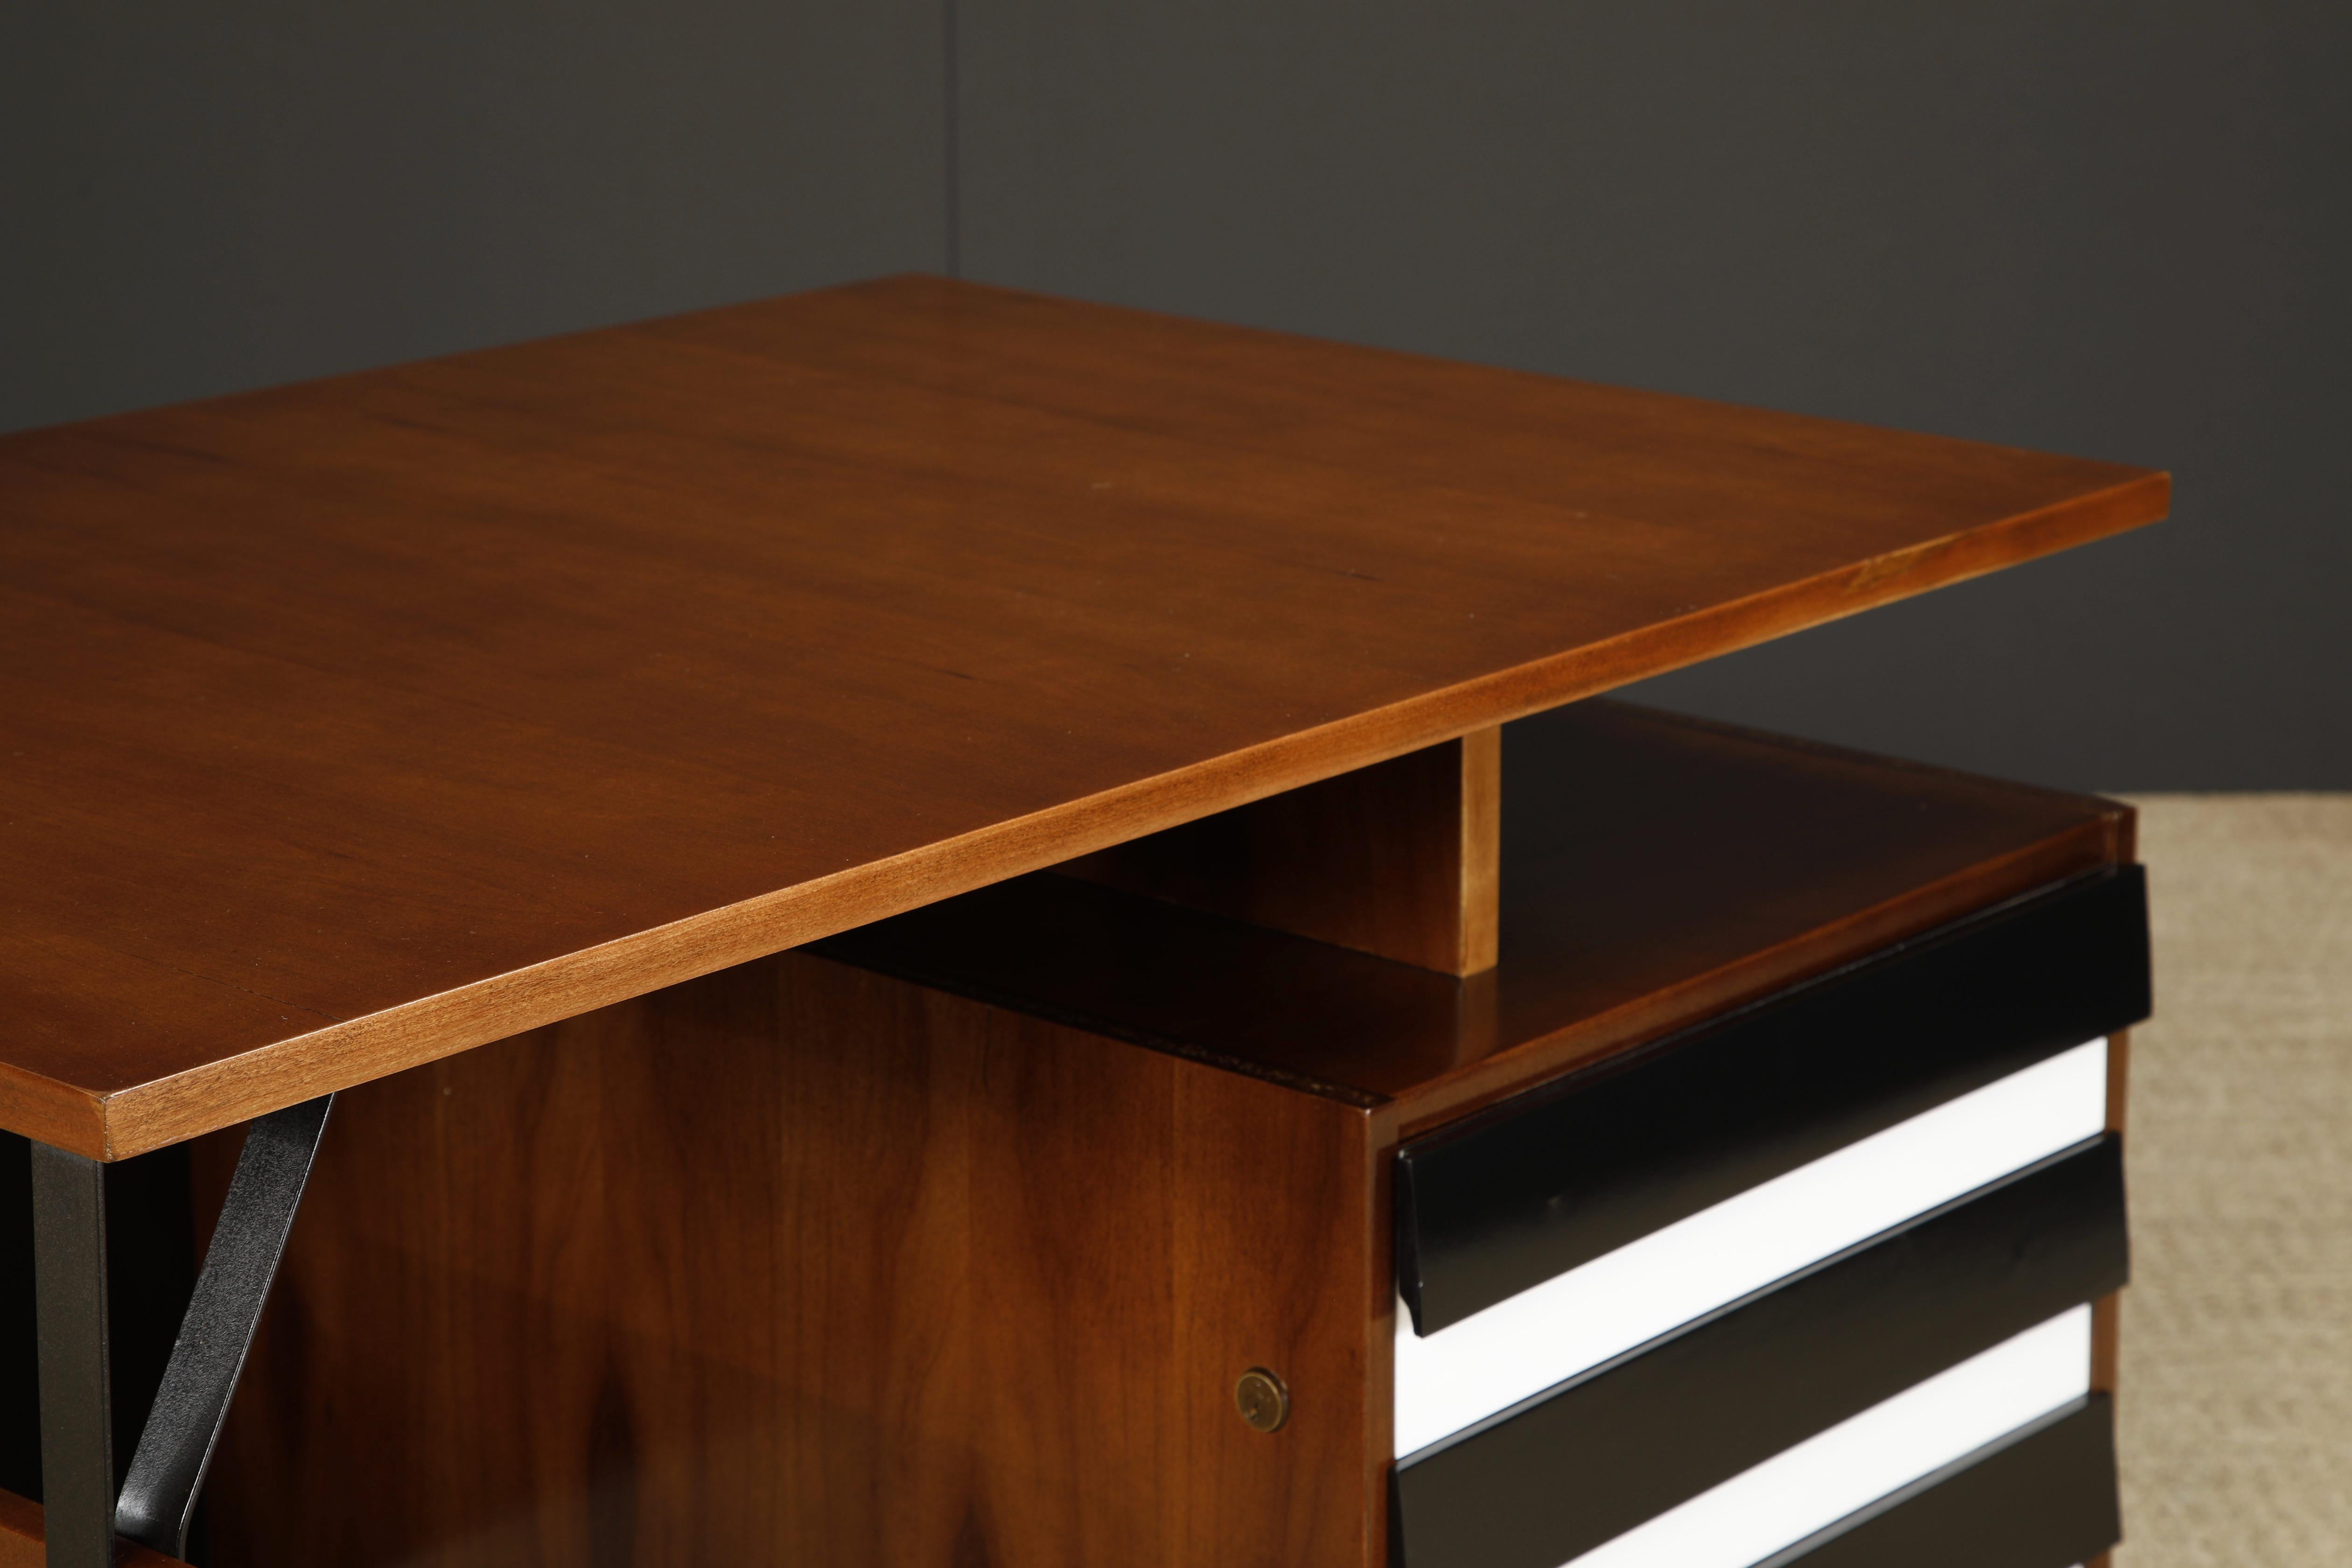 Italian Mid-Century Modern Desk, Style of Gio Ponti, c 1950s, Refinished For Sale 3